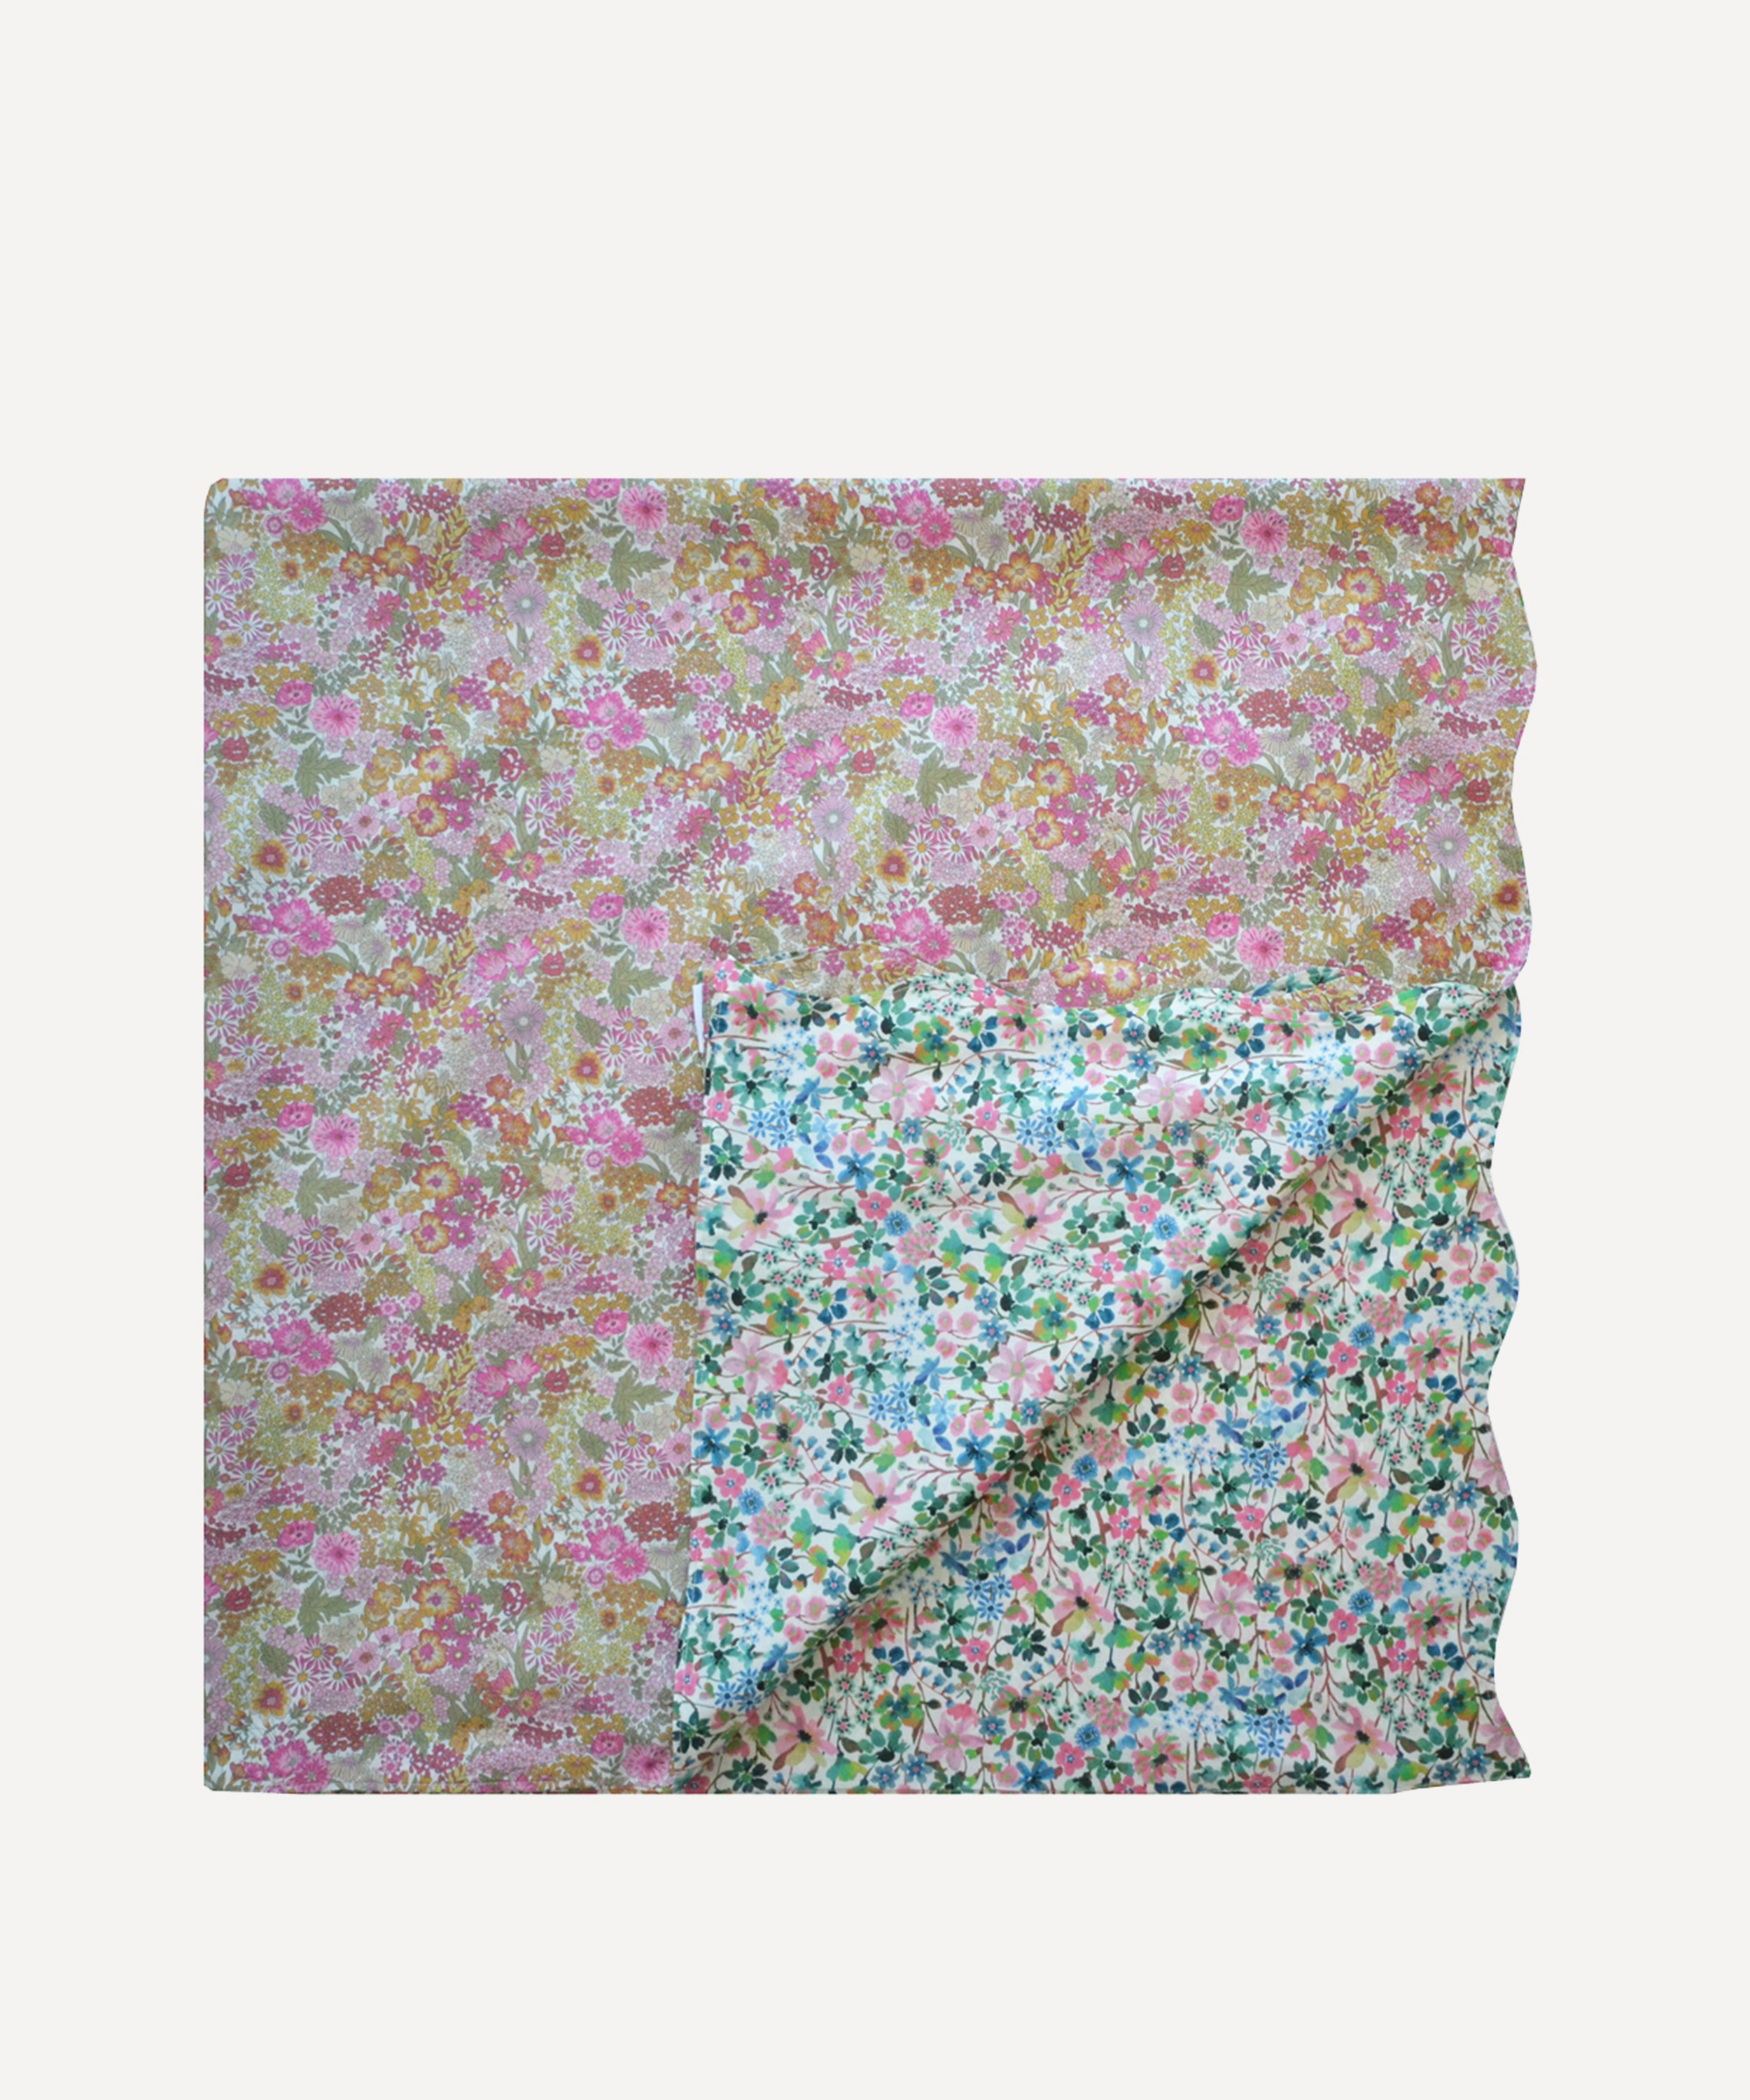 Coco & Wolf - Margaret Annie and Dreams of Summer Small Wavy Tablecloth